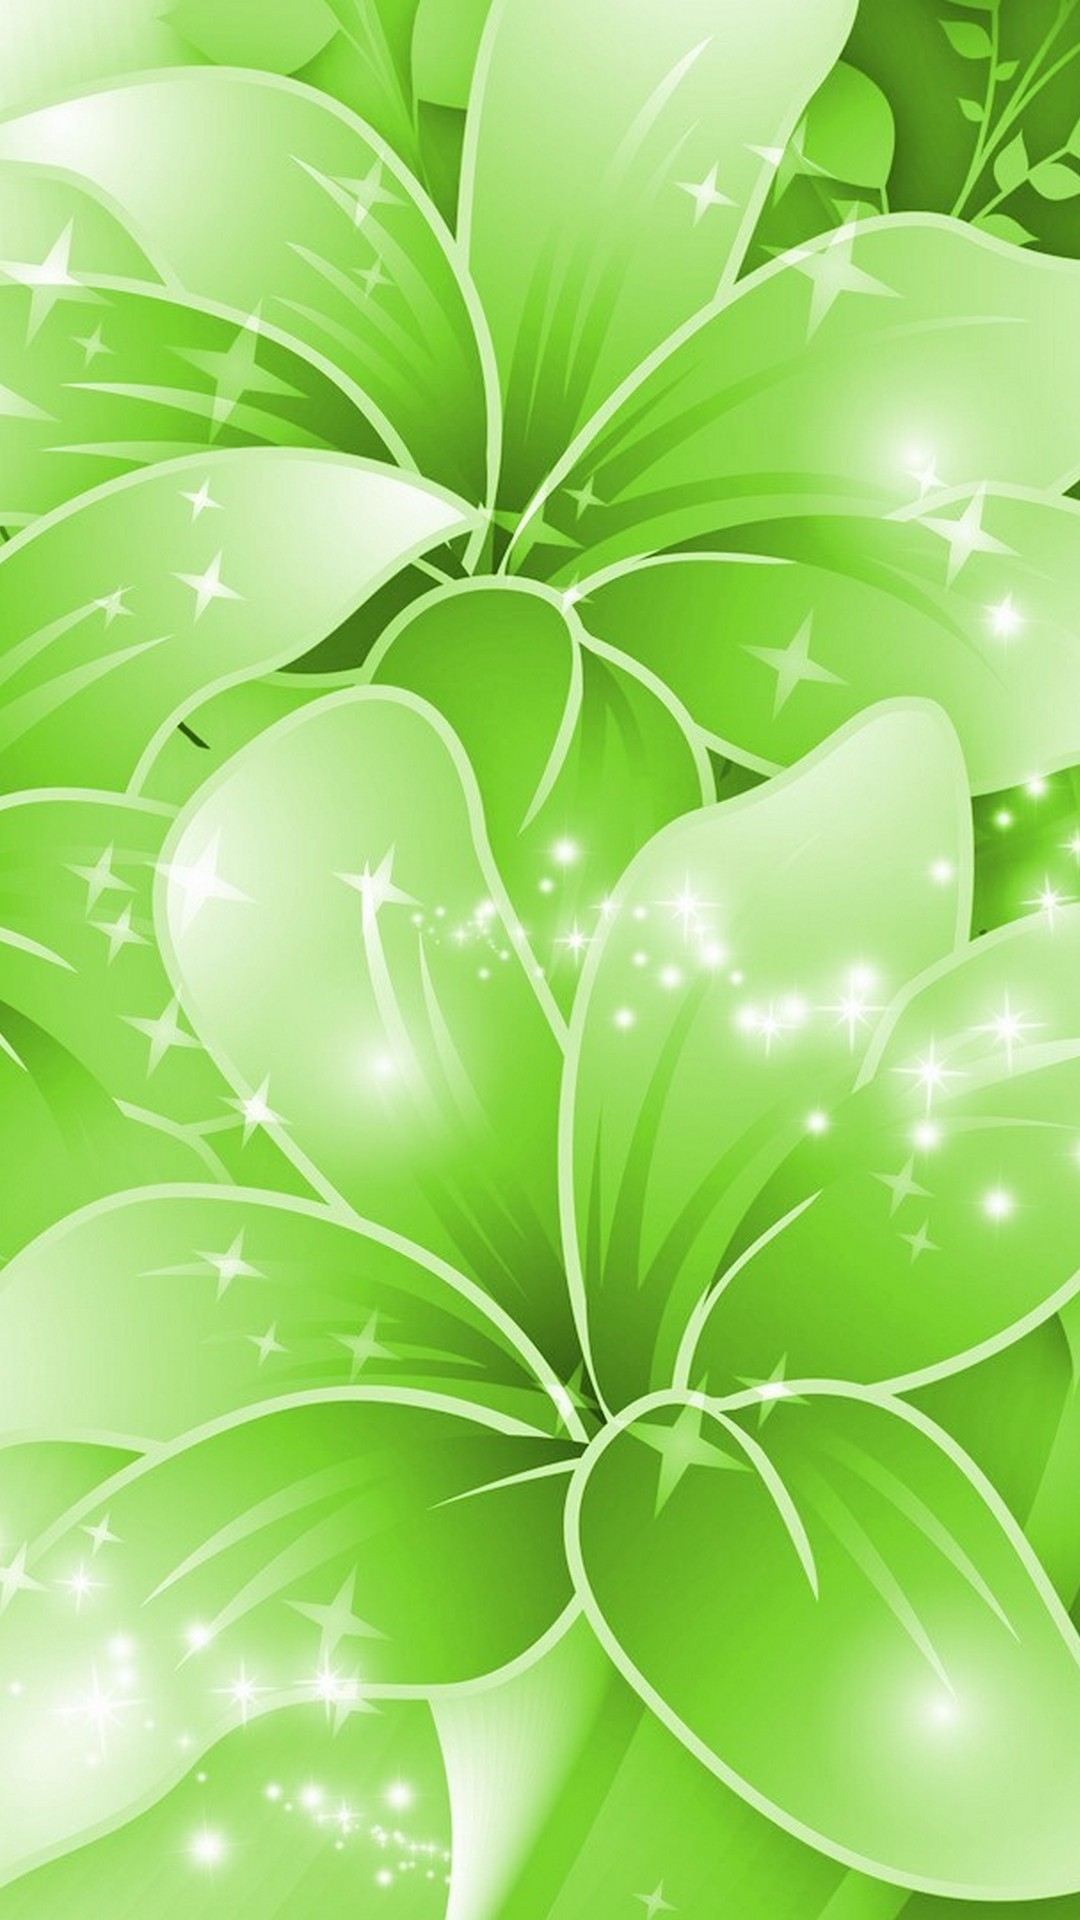 Wallpaper Android Green Colour with resolution 1080X1920 pixel. You can make this wallpaper for your Android backgrounds, Tablet, Smartphones Screensavers and Mobile Phone Lock Screen